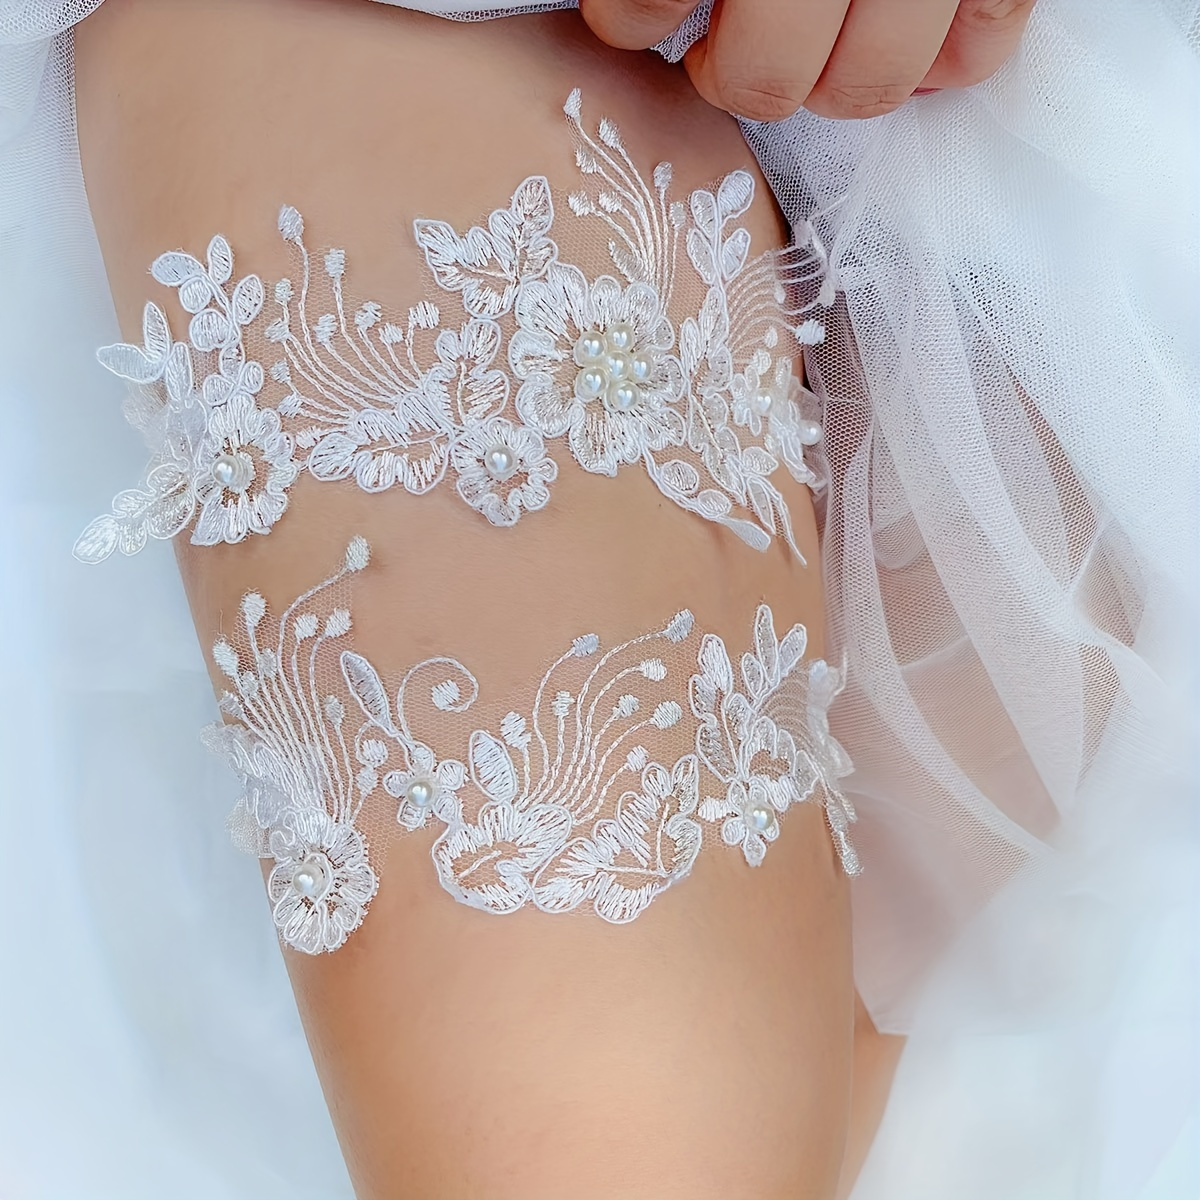 

2pc Bridal Lace Garter Set, Vintage Elastic Leg Ring With Blue Faux Pearls, Sexy Wedding Suspender Belts For Women Body Jewelry